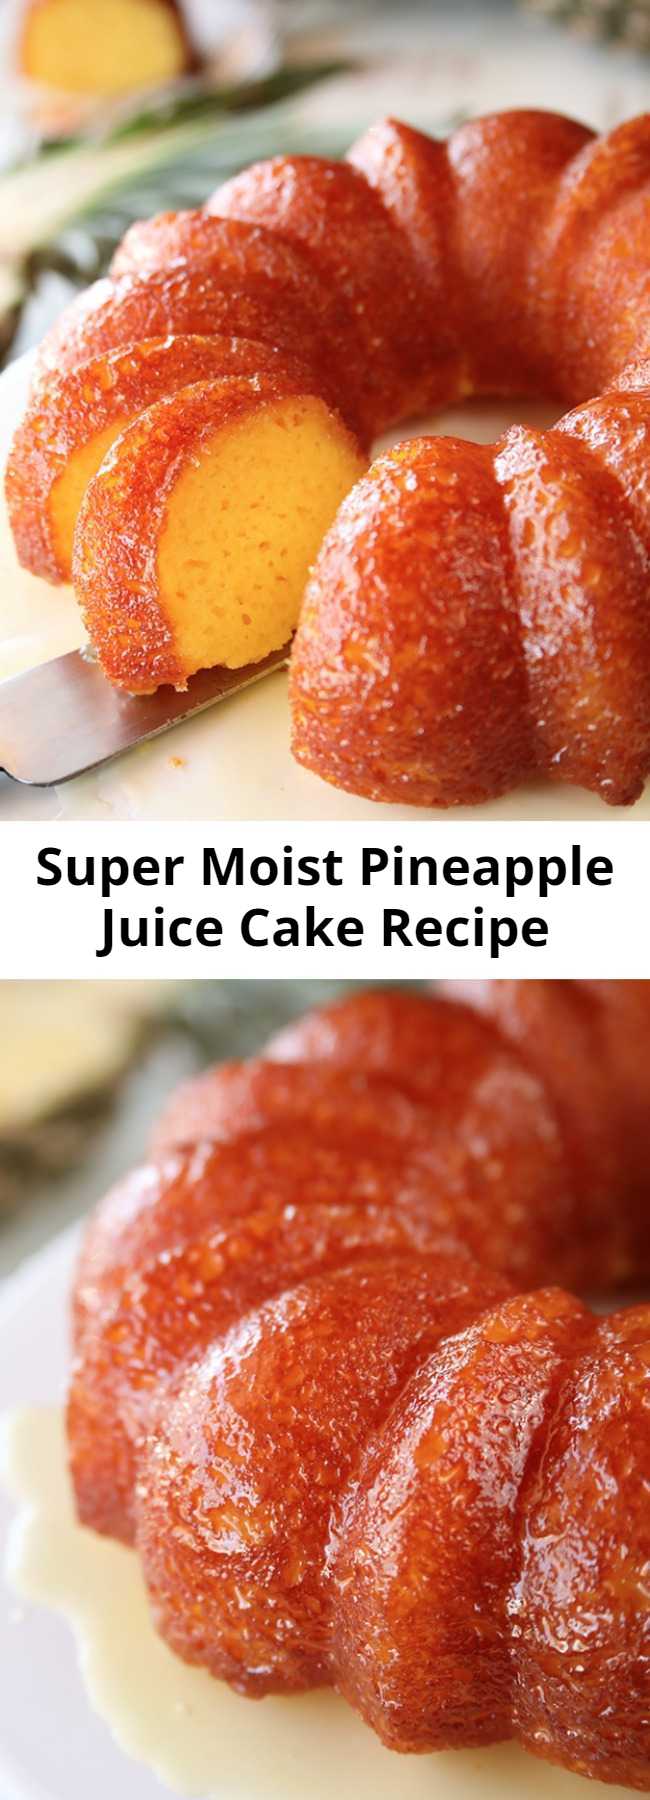 Super Moist Pineapple Juice Cake Recipe - The super moist cake is infused with pineapple flavor in the batter and the butter-pineapple glaze that it gets soaked in amps that pineapple flavor up even more!